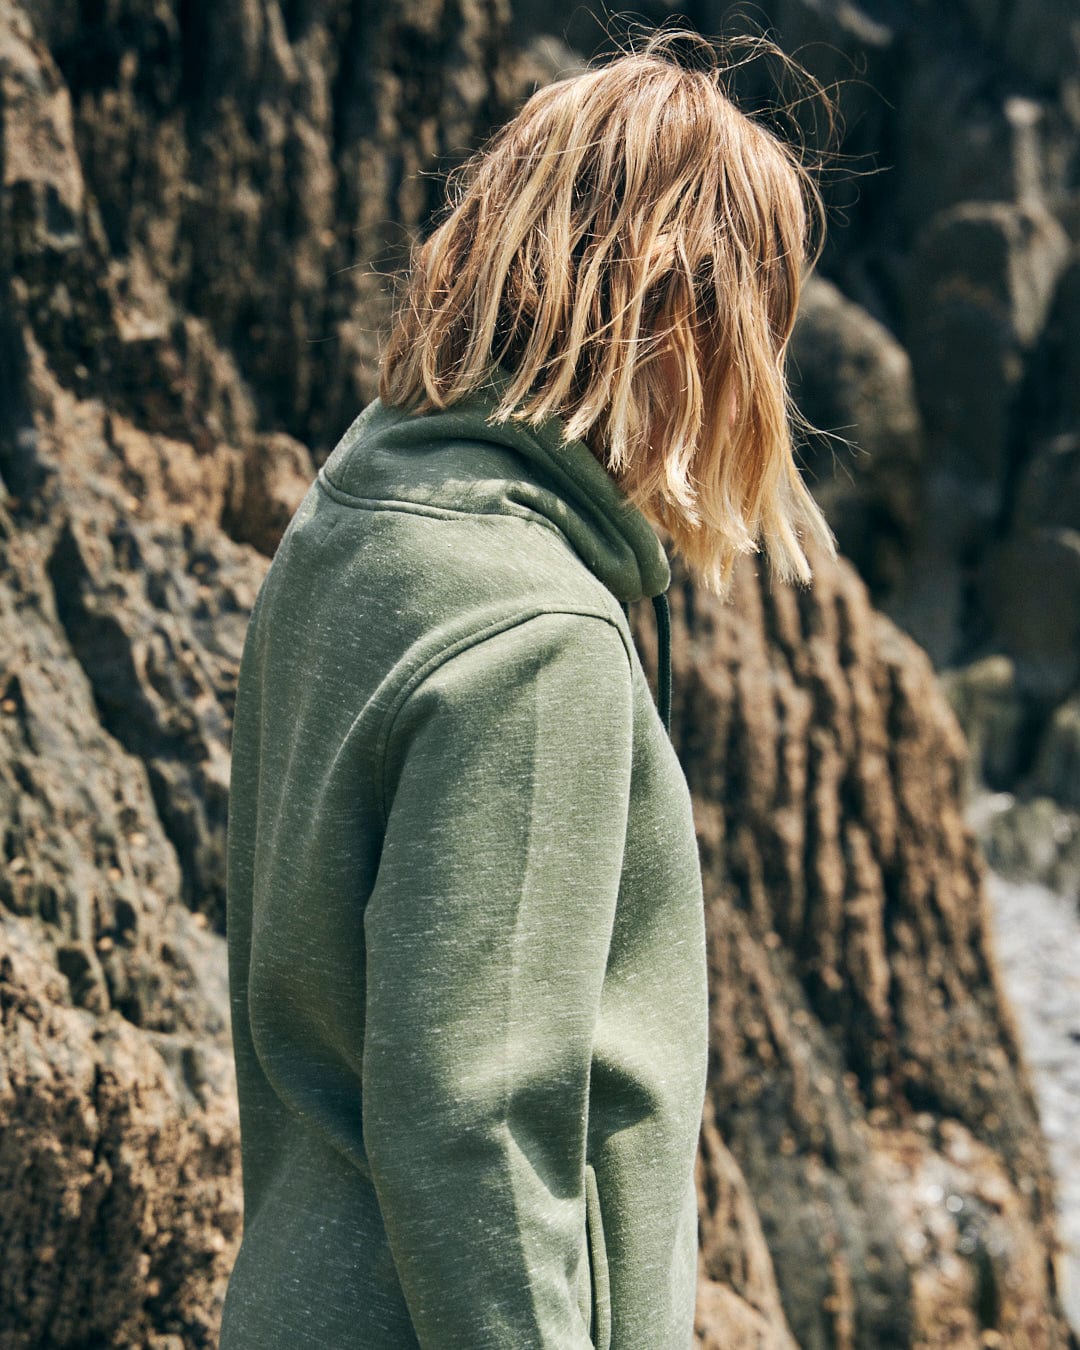 Person with shoulder-length blond hair is wearing the Saltrock Harper Women's Longline Pop Sweat in green and standing near large rocks.